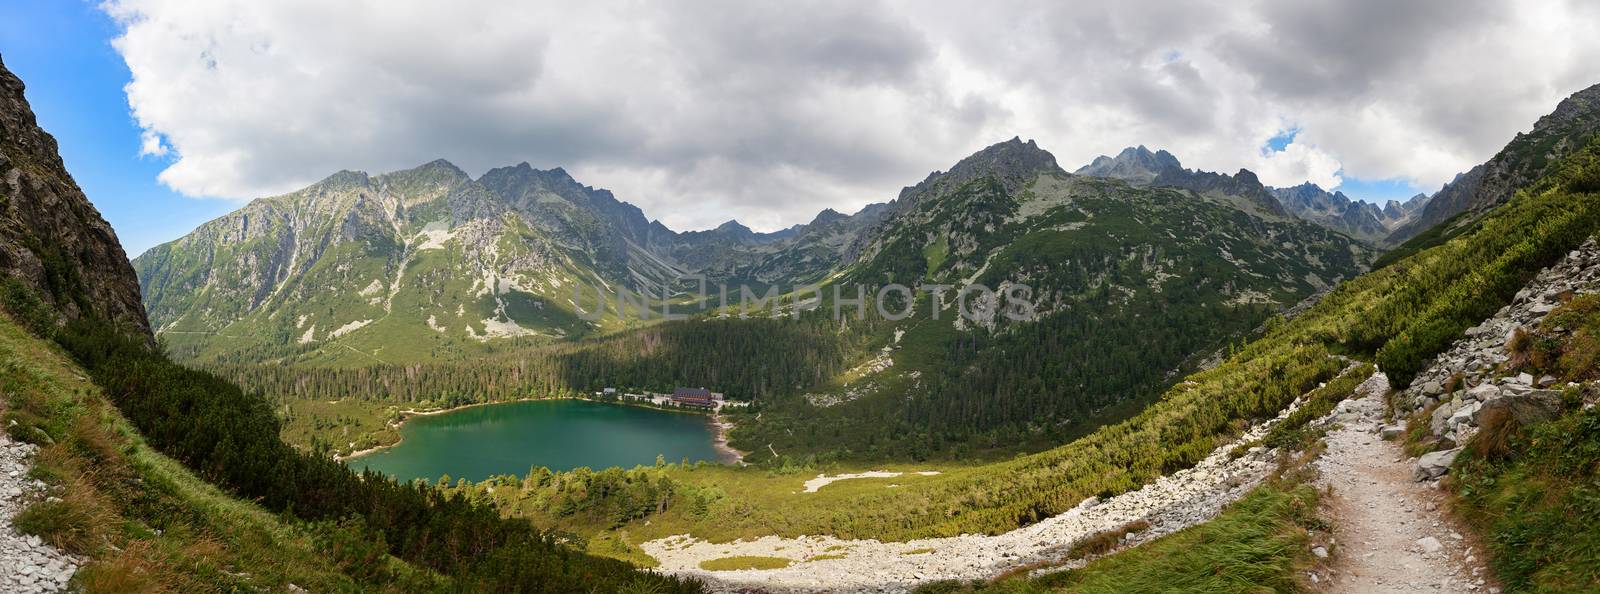 Alpine lake Popradske pleso in the morning with a great view on Tatra mountains.